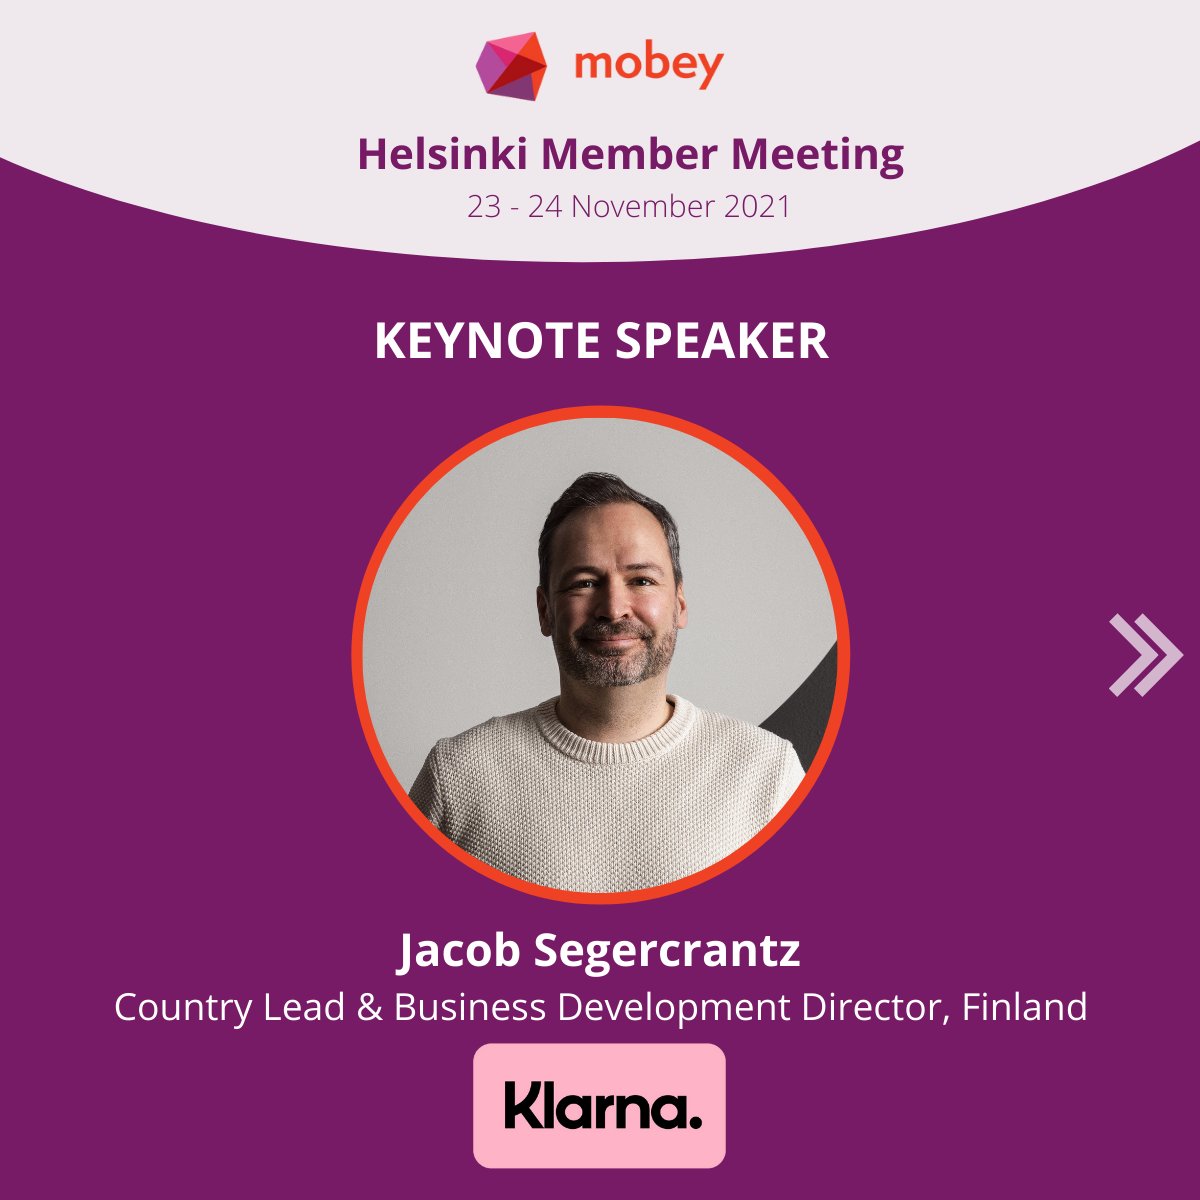 Join @JSegercrantz - from @Klarna  - at Mobey's Helsinki Member Meeting on 23-24 November. Jacob will be presenting the story of Klarna: From Global Payments to Global Shopping. 

Please save your seat by registering here: https://t.co/24AESDceqz

#banking #bankingandfinance https://t.co/dVXXvmzYxd